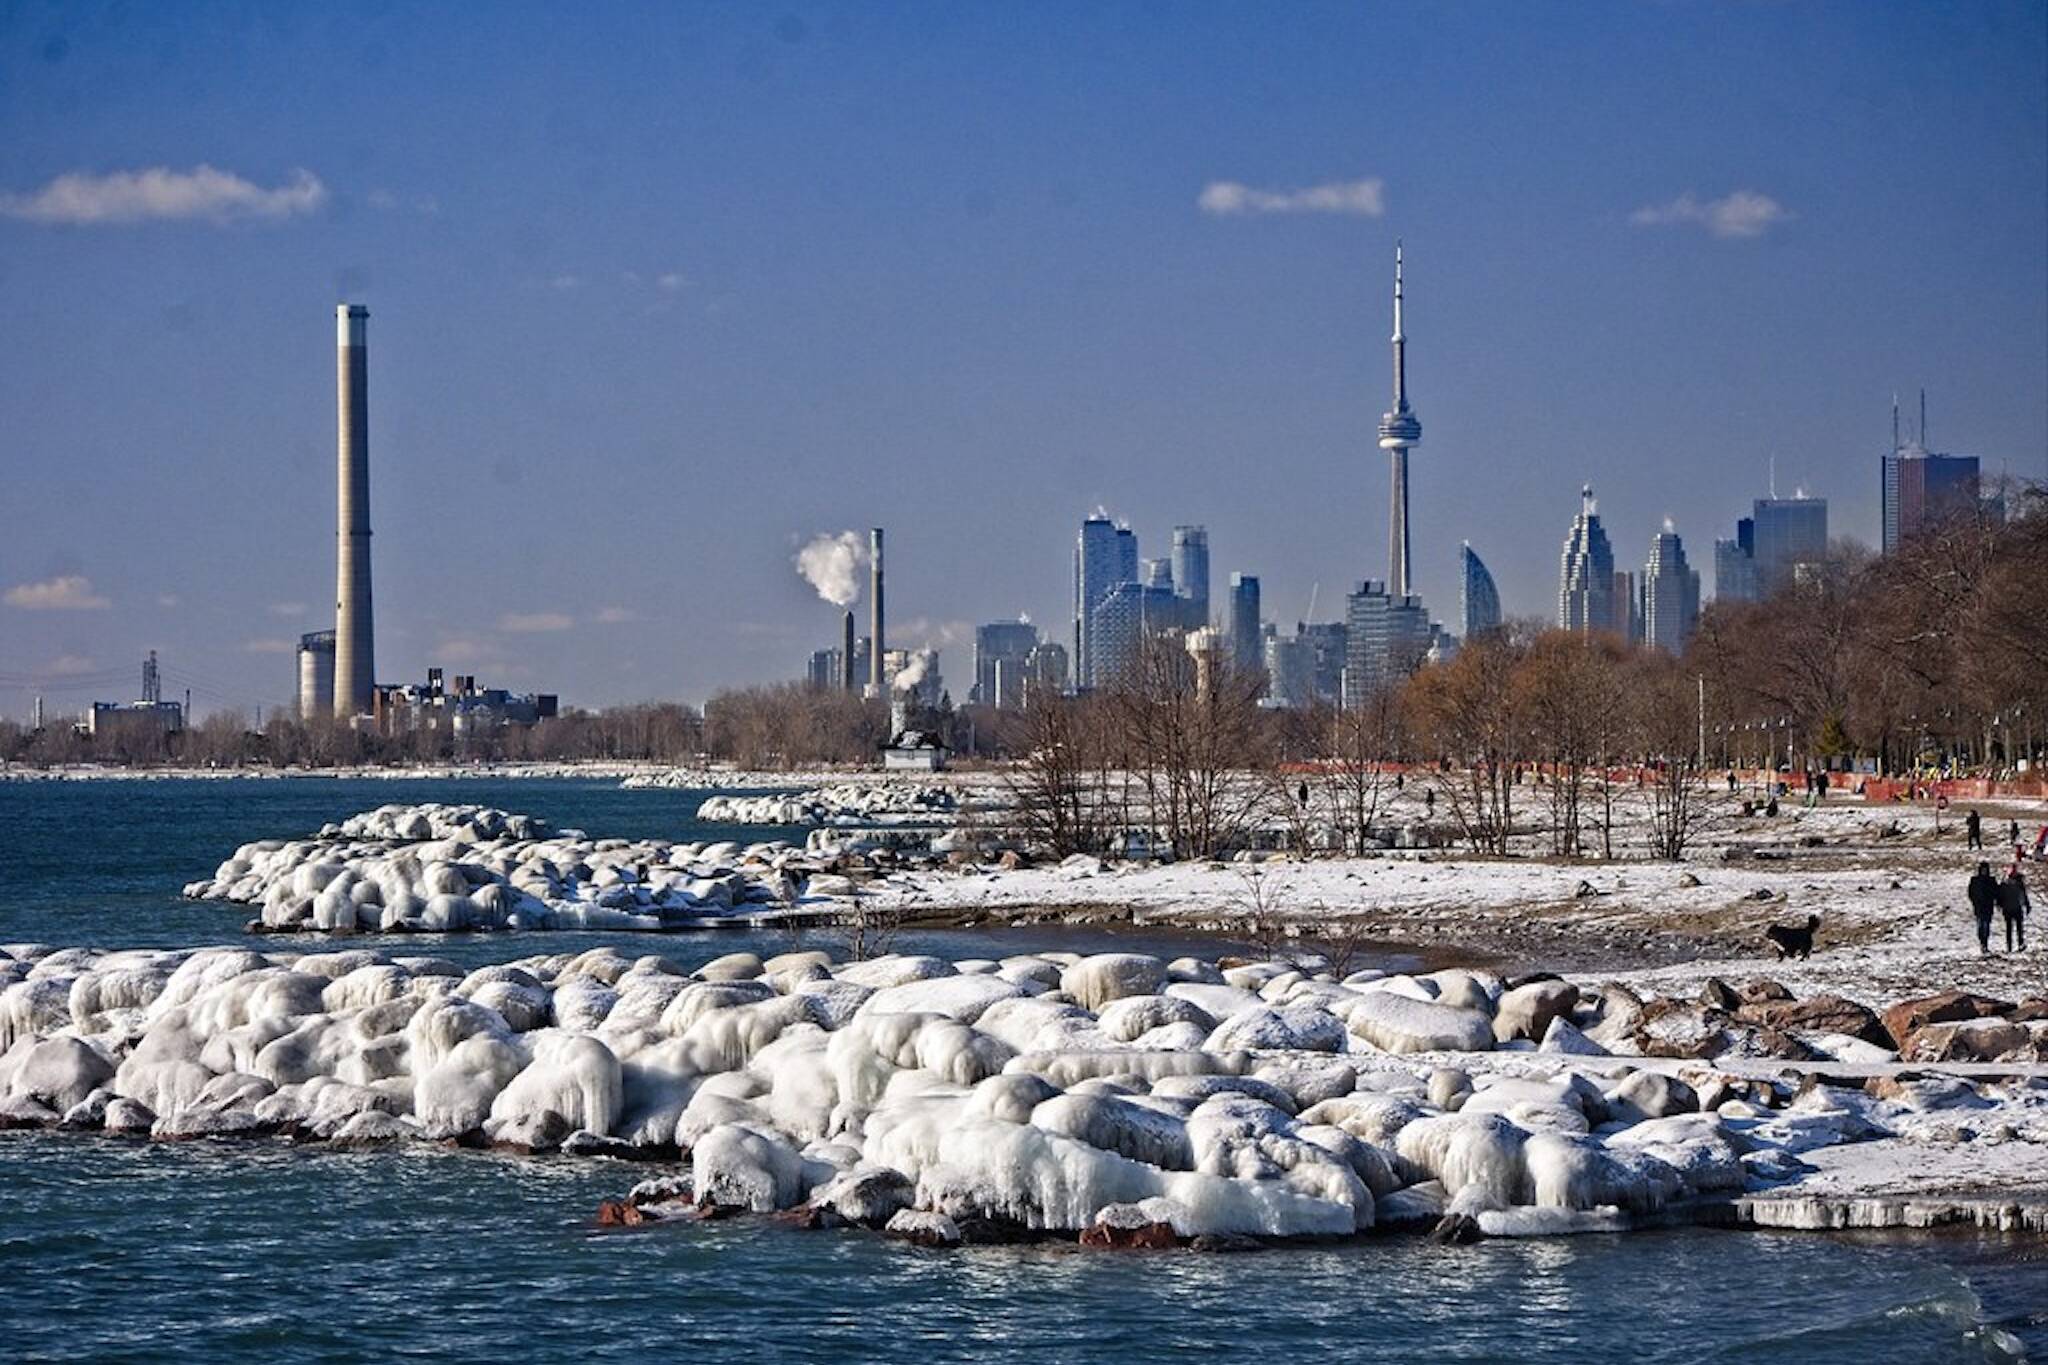 Toronto issues extreme cold weather alert as temperatures dip